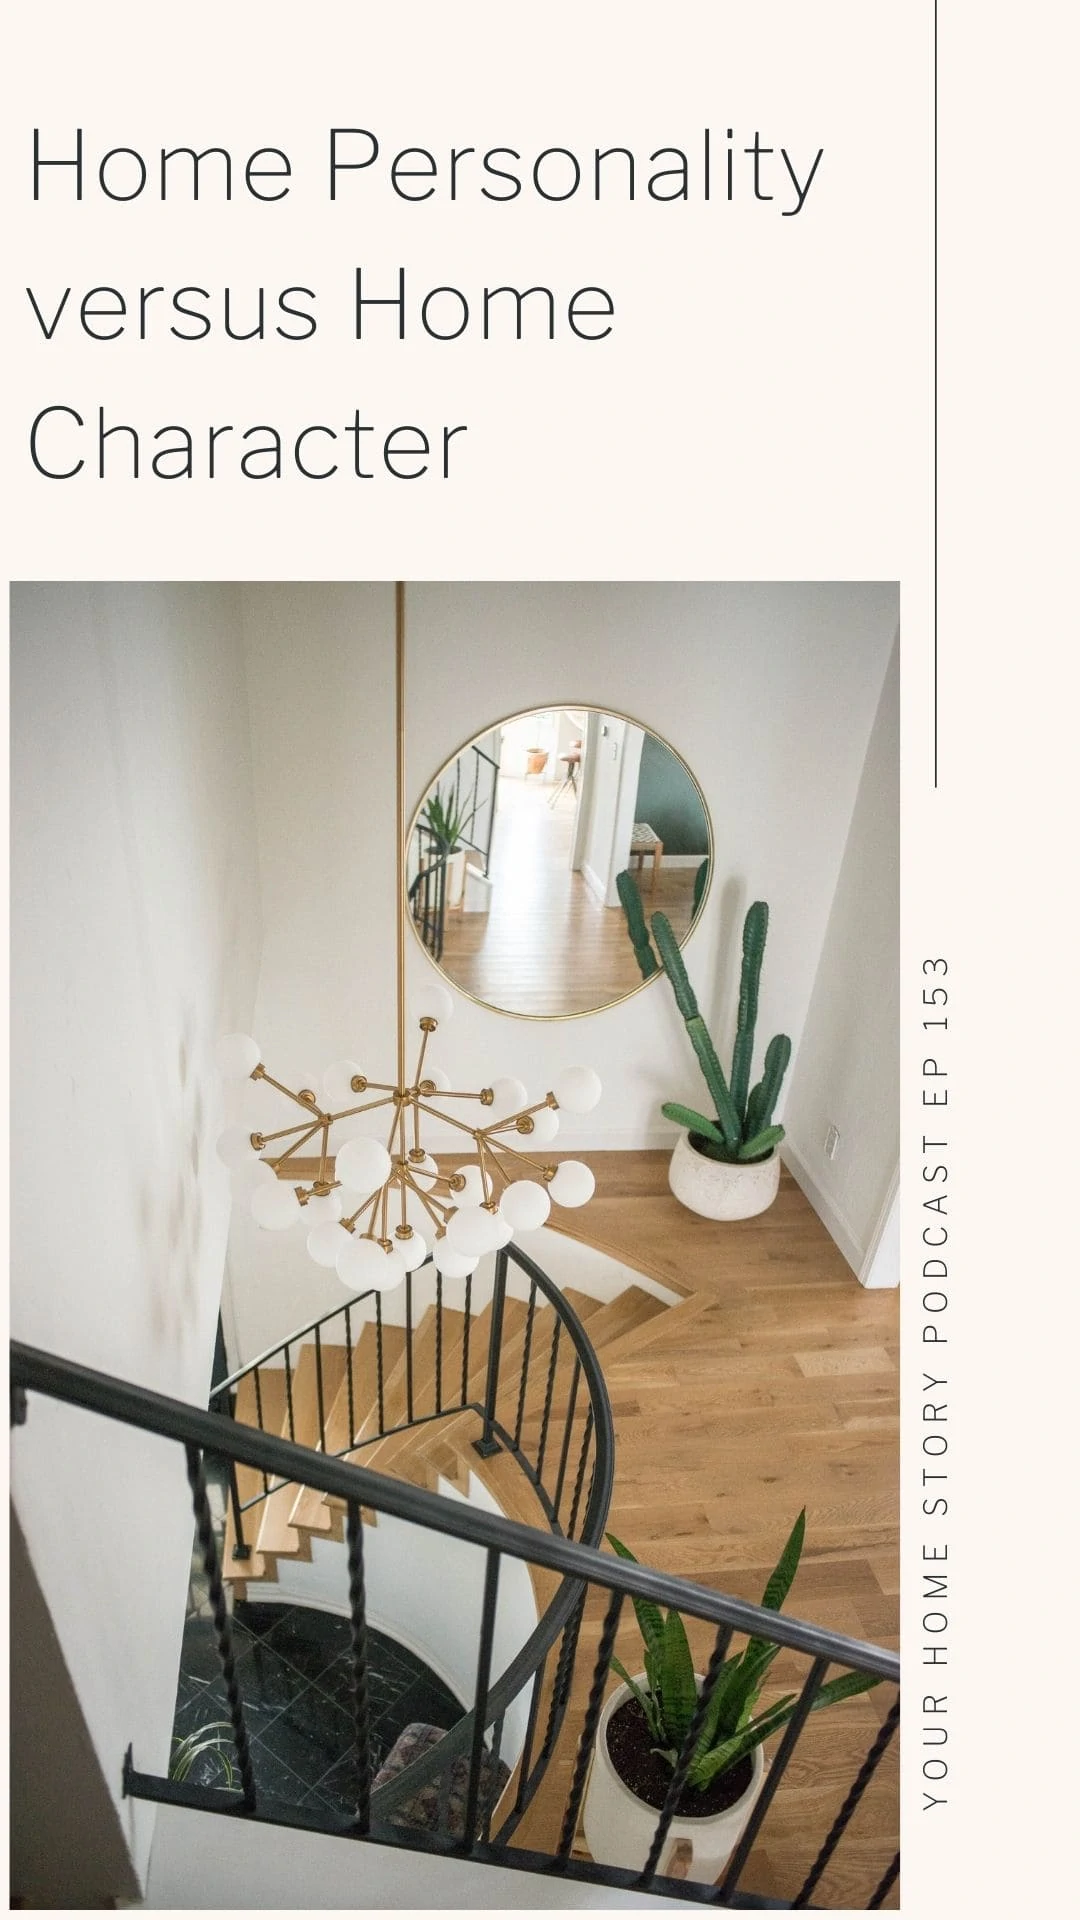 What is home personality? Home character? Showing a circle stairs for home character.